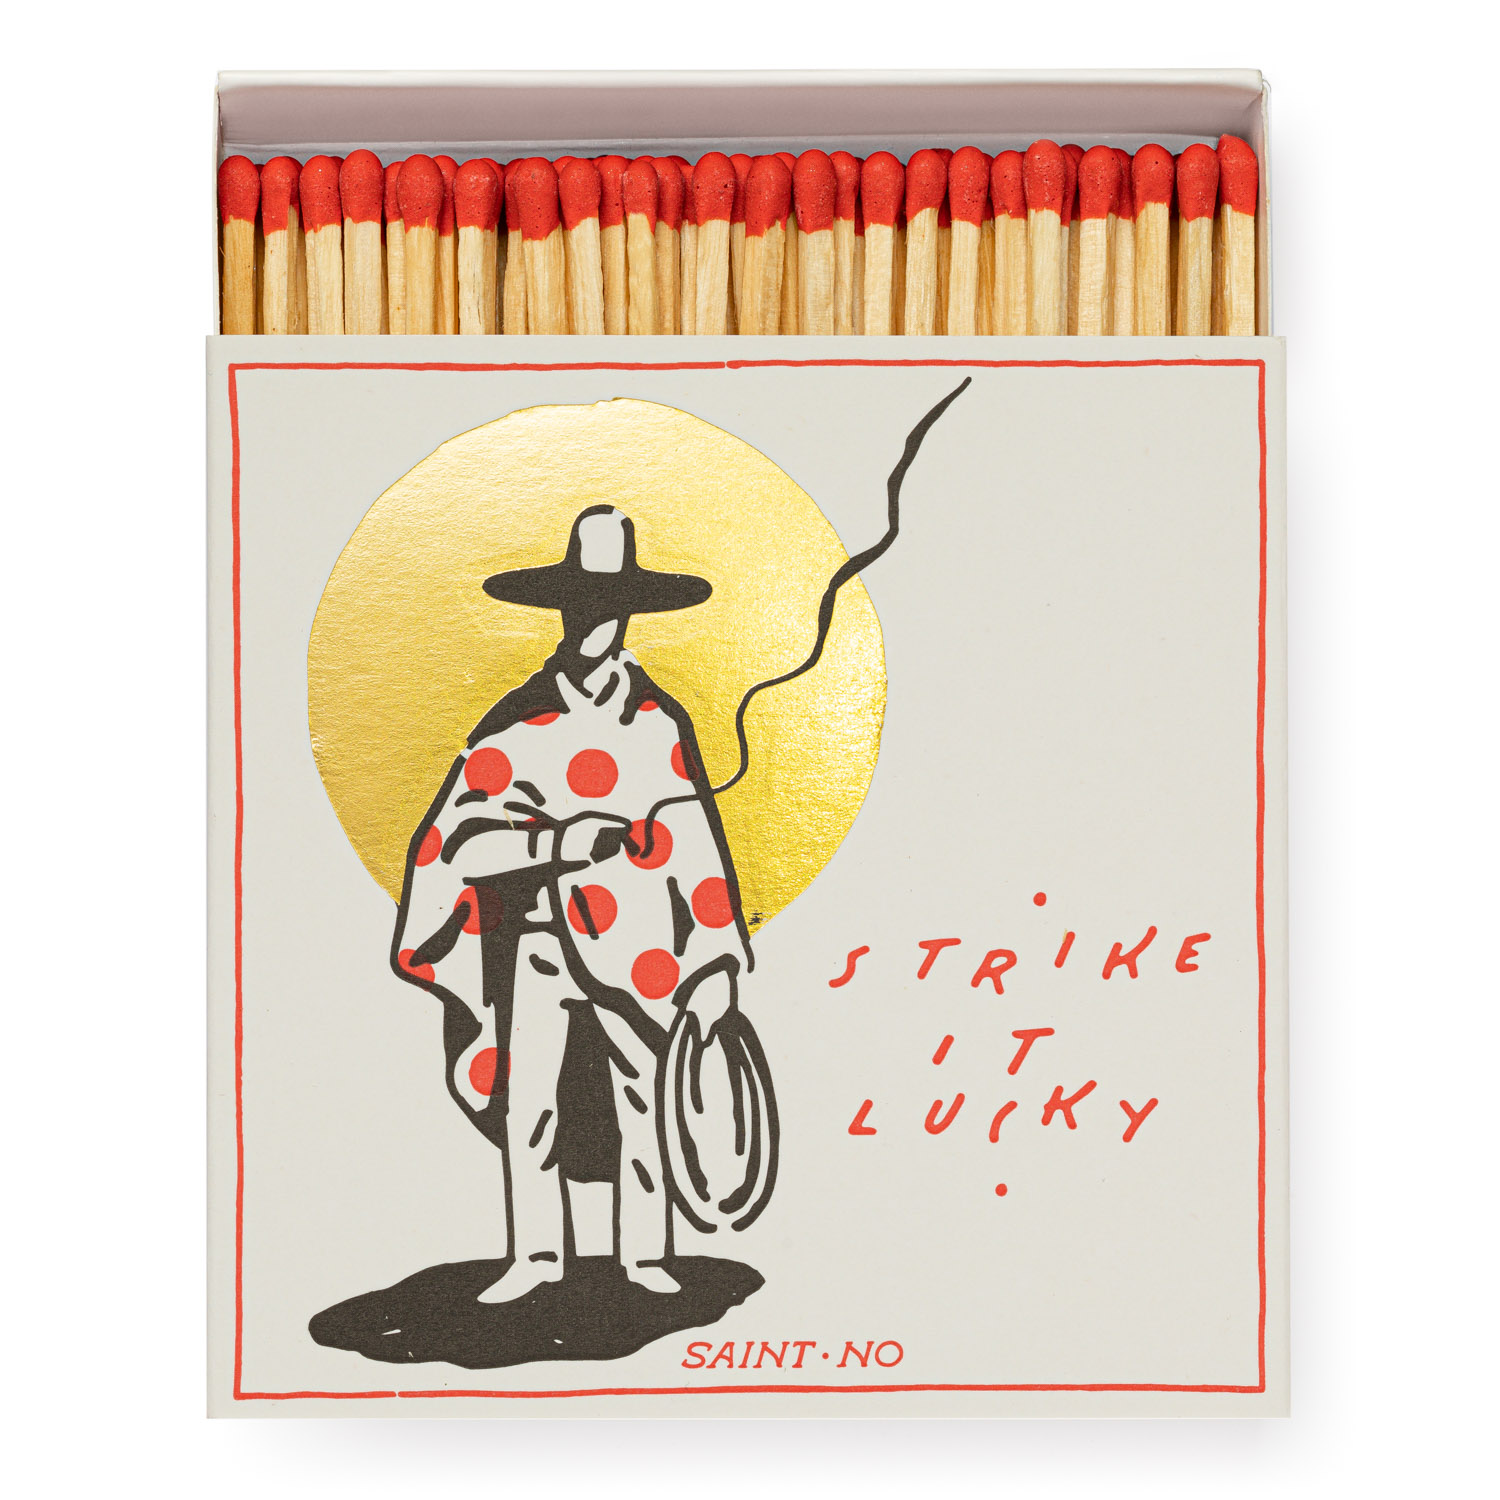 Strike it Lucky - Square Matchboxes - Saint No - from Archivist Gallery 